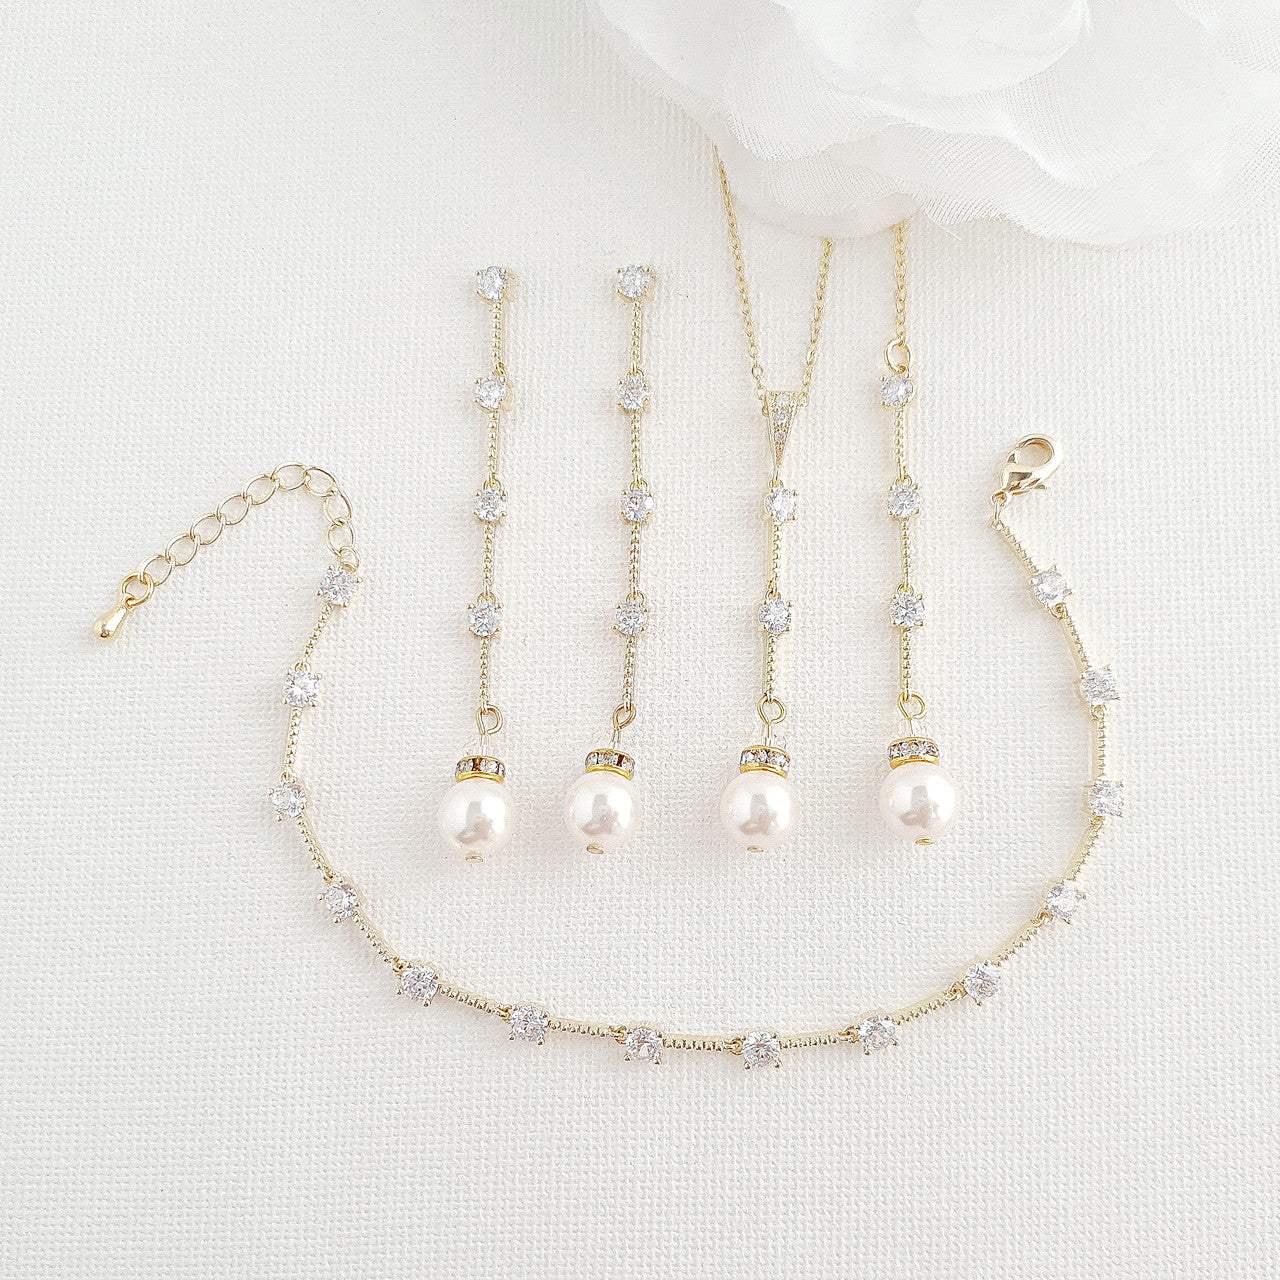 Gold Jewellery Set with Pearl Drop Earrings Necklace Bracelet-Ginger